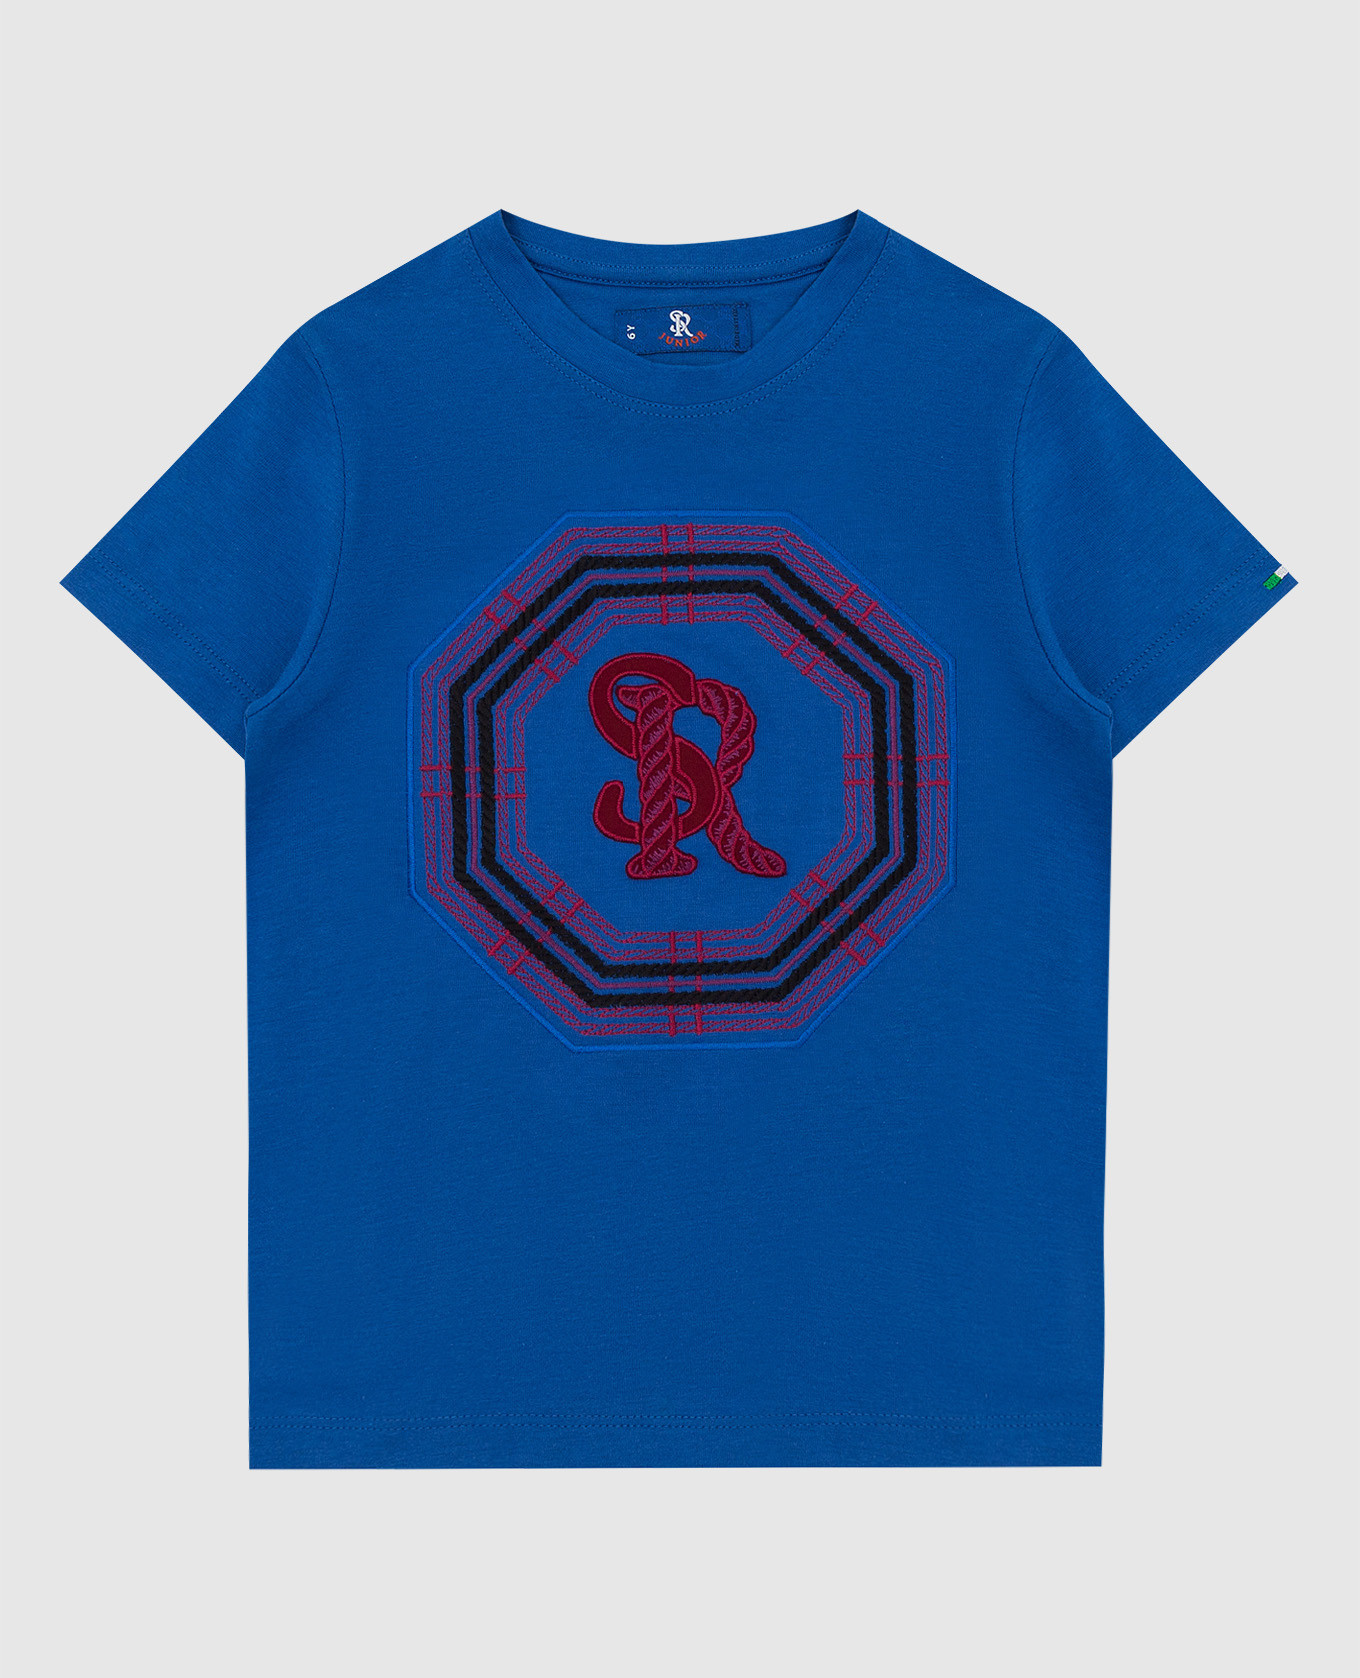 Children's blue t-shirt with monogram embroidery